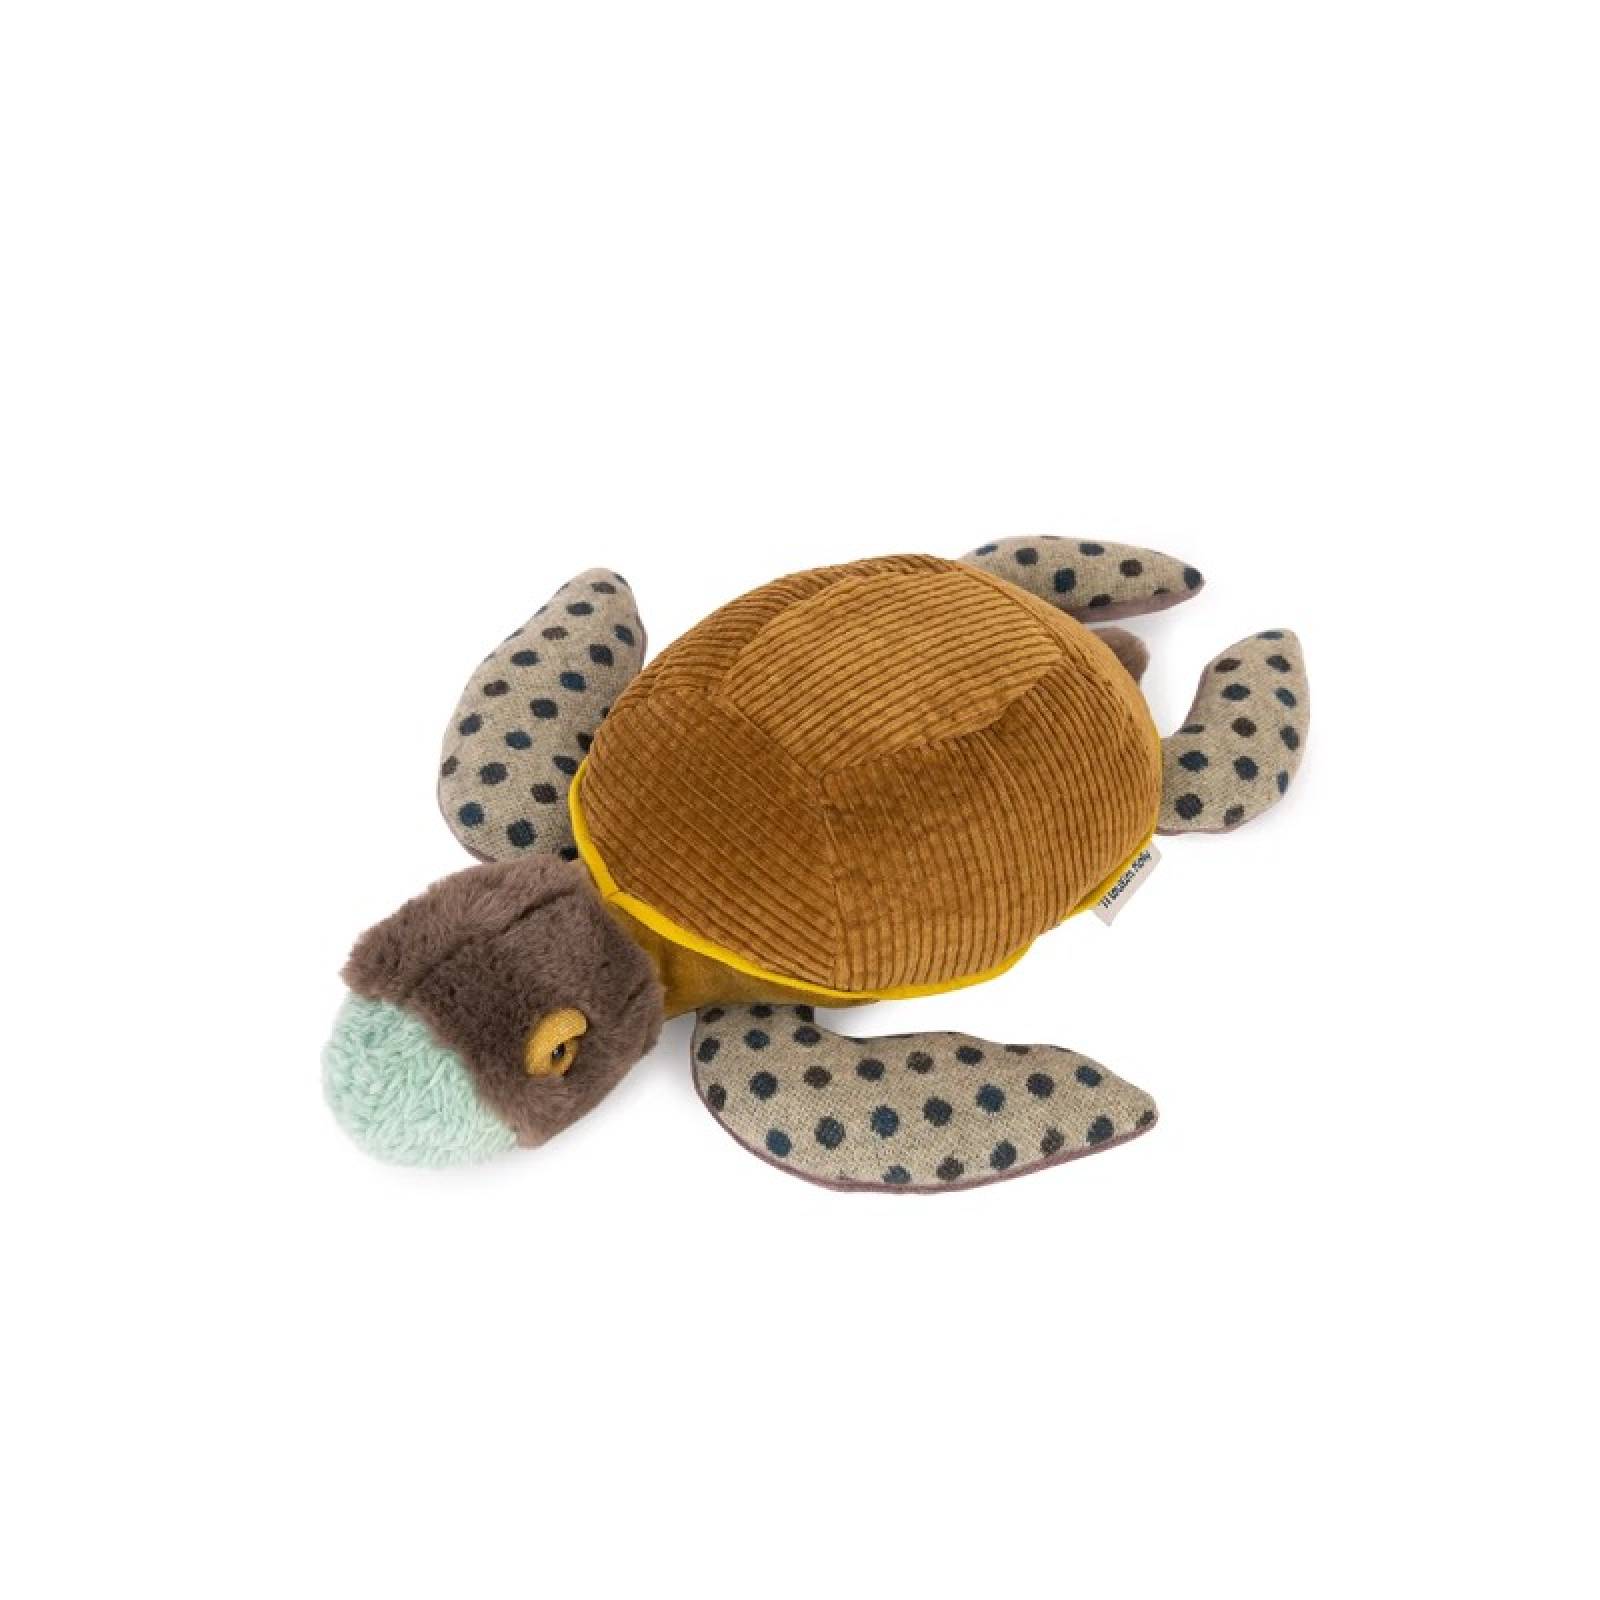 Small Turtle Soft Toy By Moulin Roty 36cm 0+